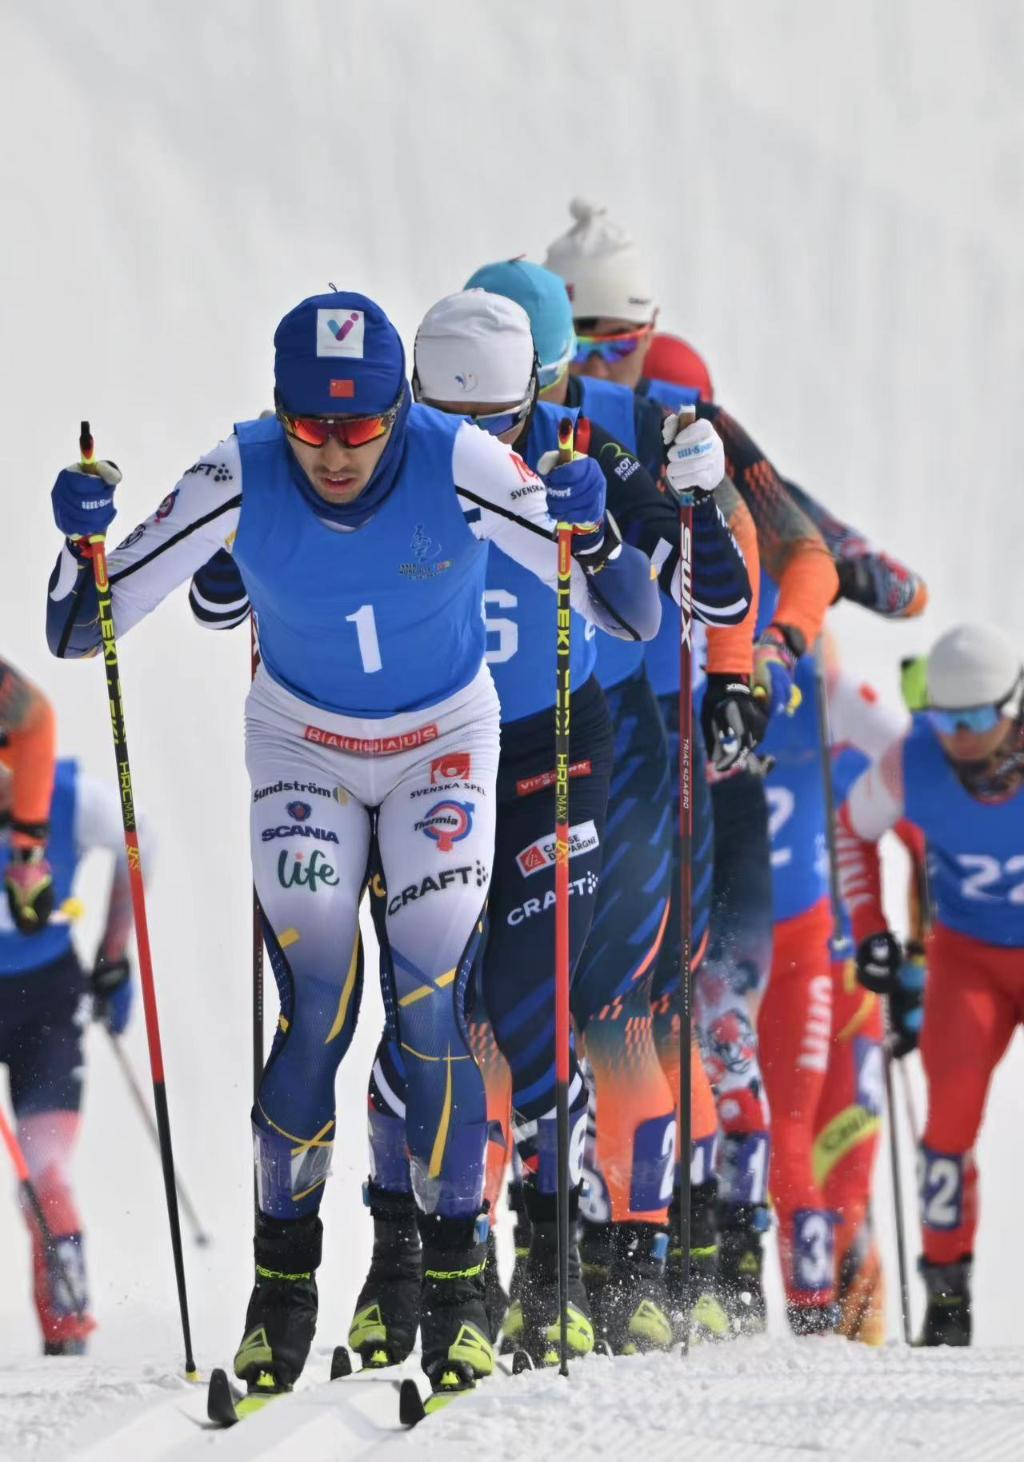 Wang Qiang won the gold medal in Men’s 50km Mass Start Classic at the 14th National Winter Games of China. (Photo provided by Chongqing Municipal Winter Sports Administrative Center)